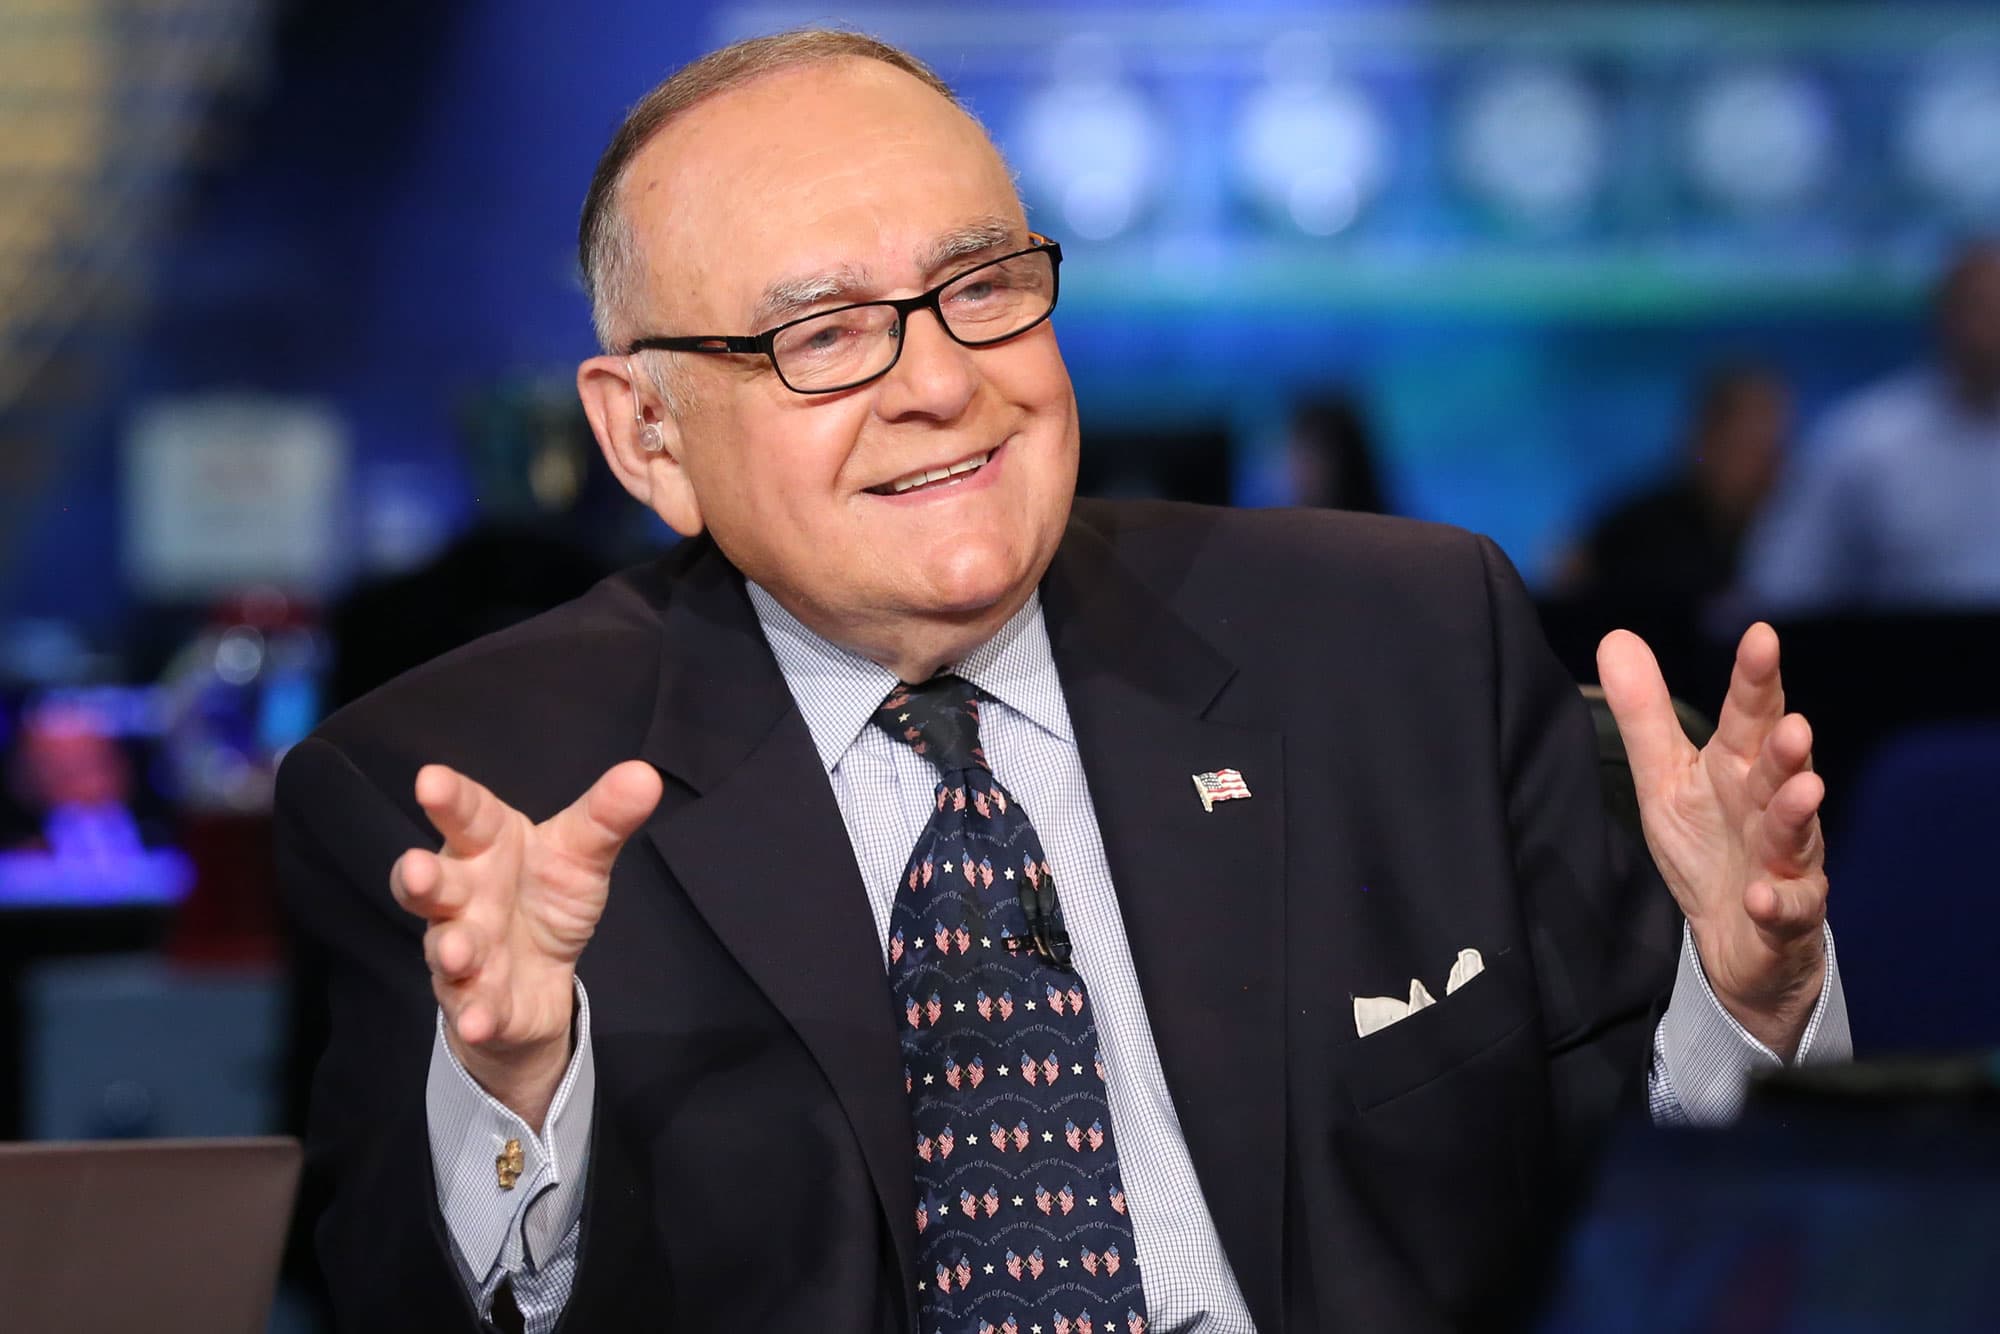 Leon Cooperman calls Alphabet an ‘ideal holding’ that is ‘very cheap’